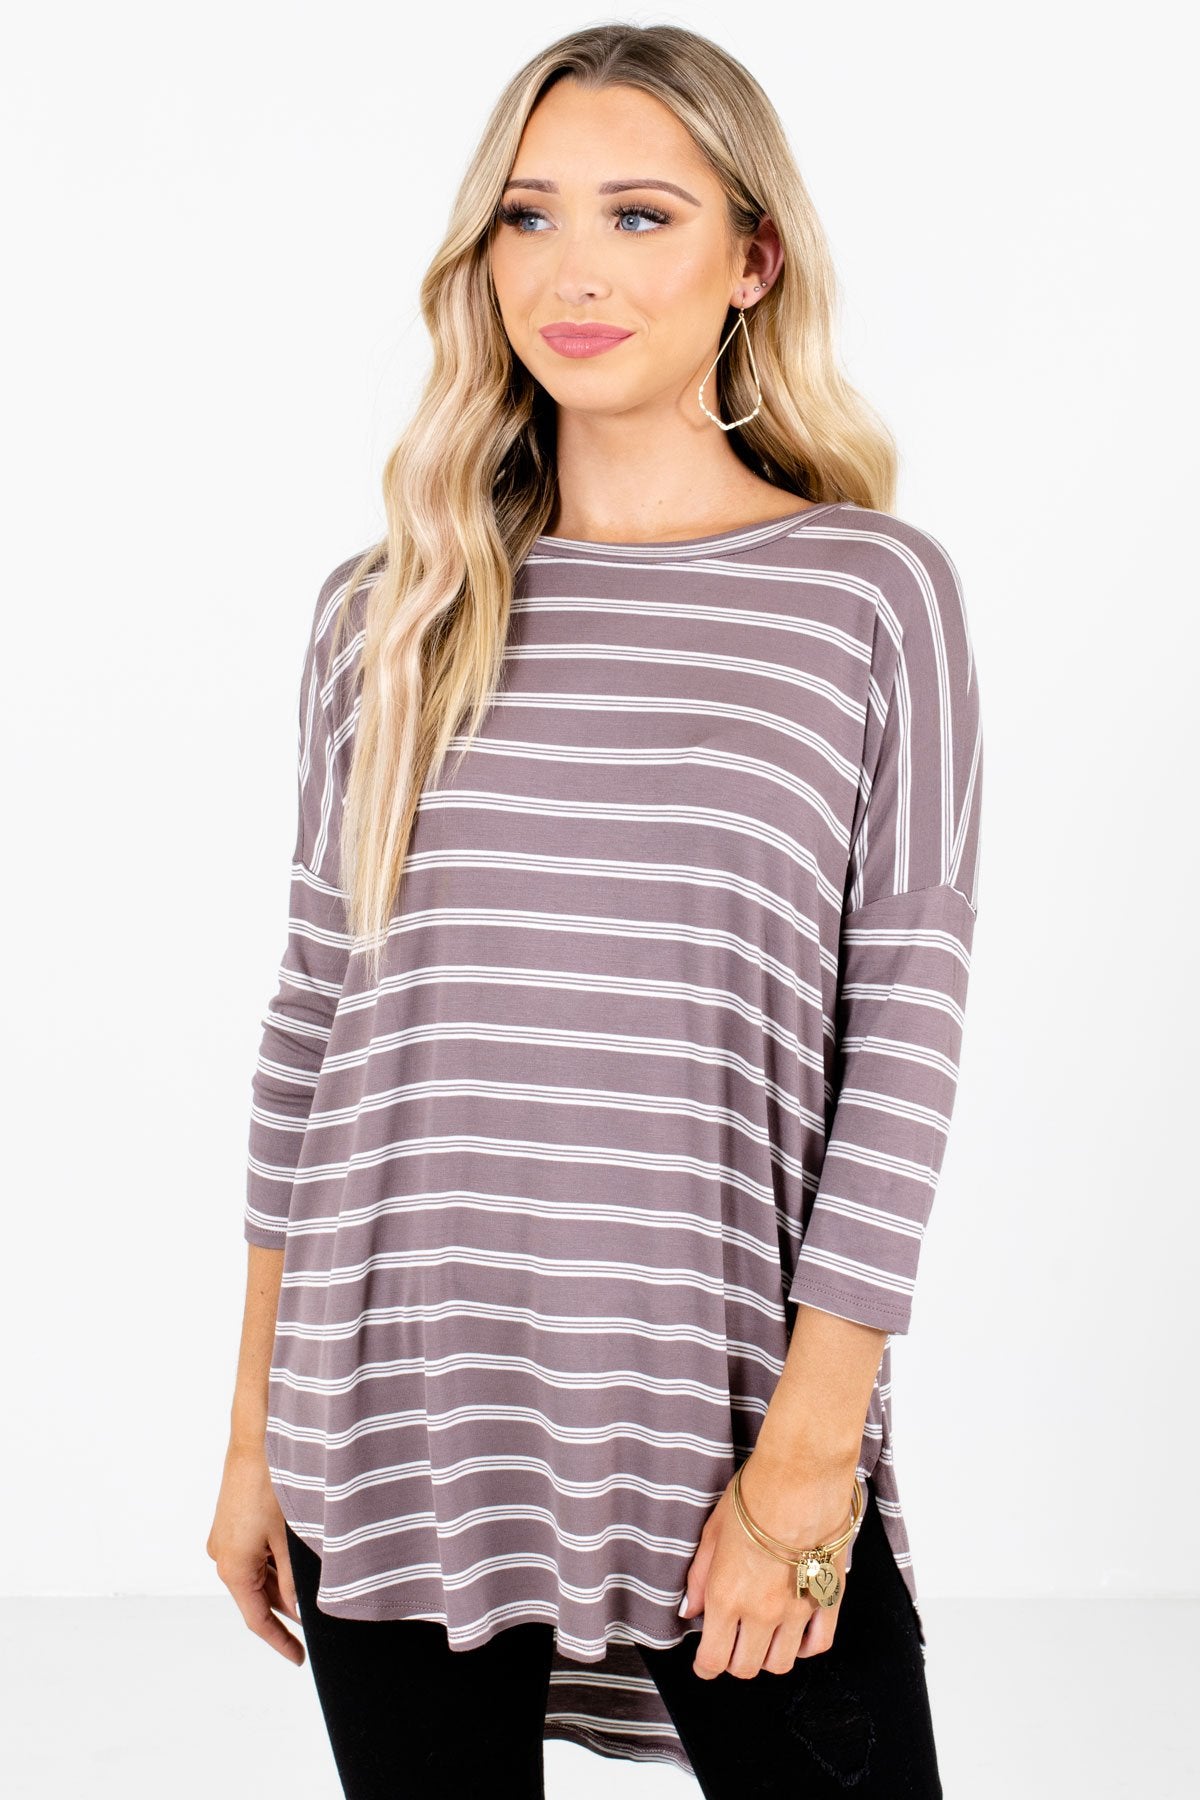 Just the Beginning Mocha Brown Striped Top Boutique Tops